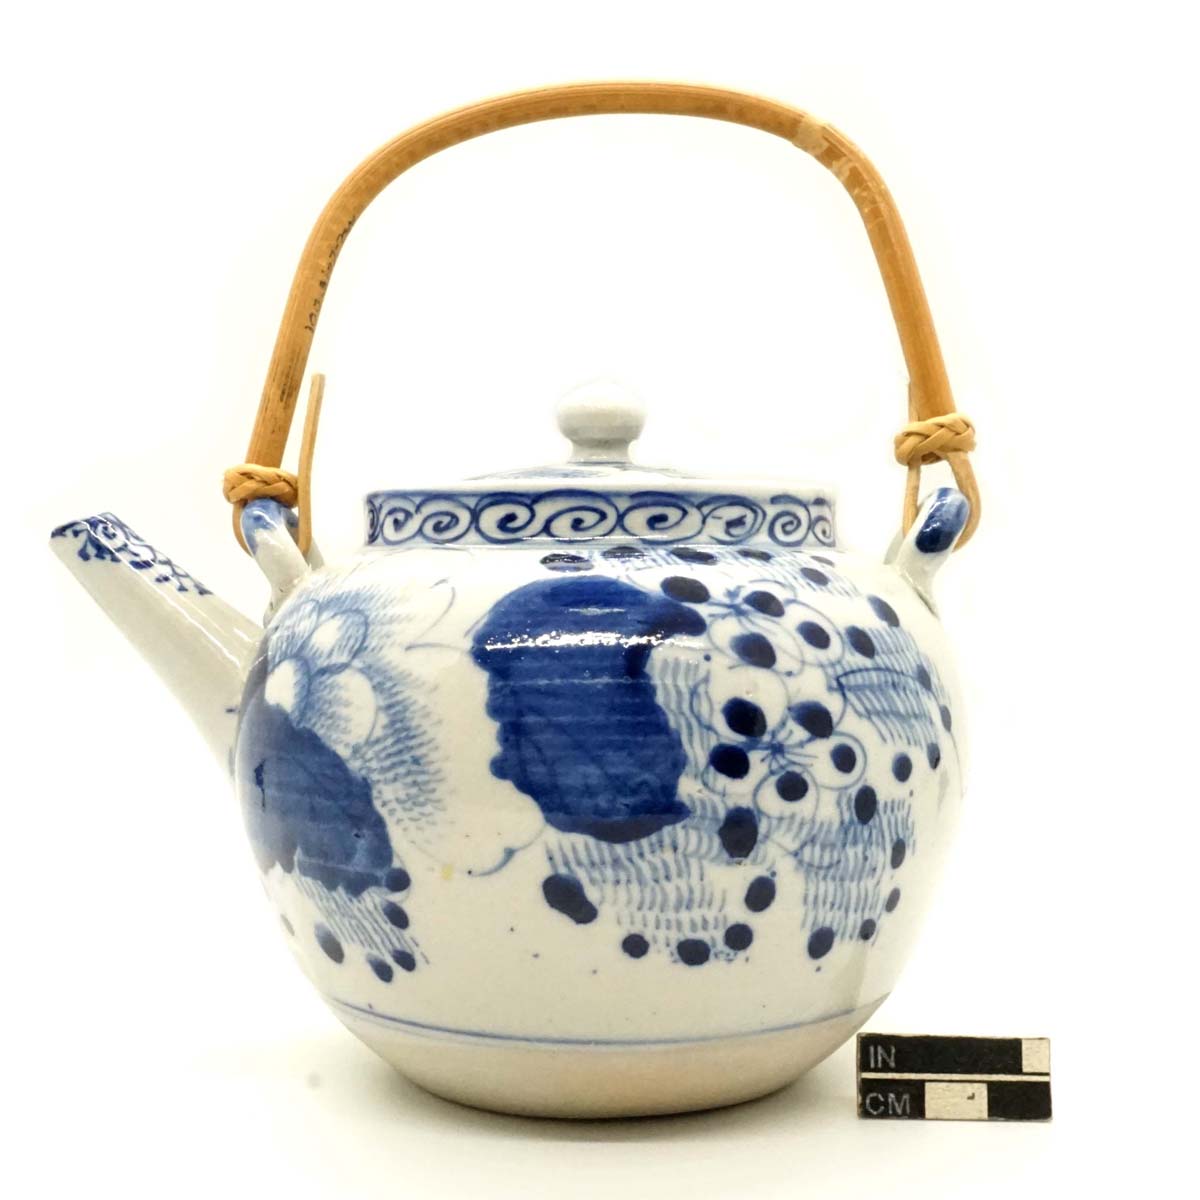 Dobin-style teapot with bamboo handle, Aizu-Hongo ware with sometsuke (hand-painted cobalt) decoration, porcelain.